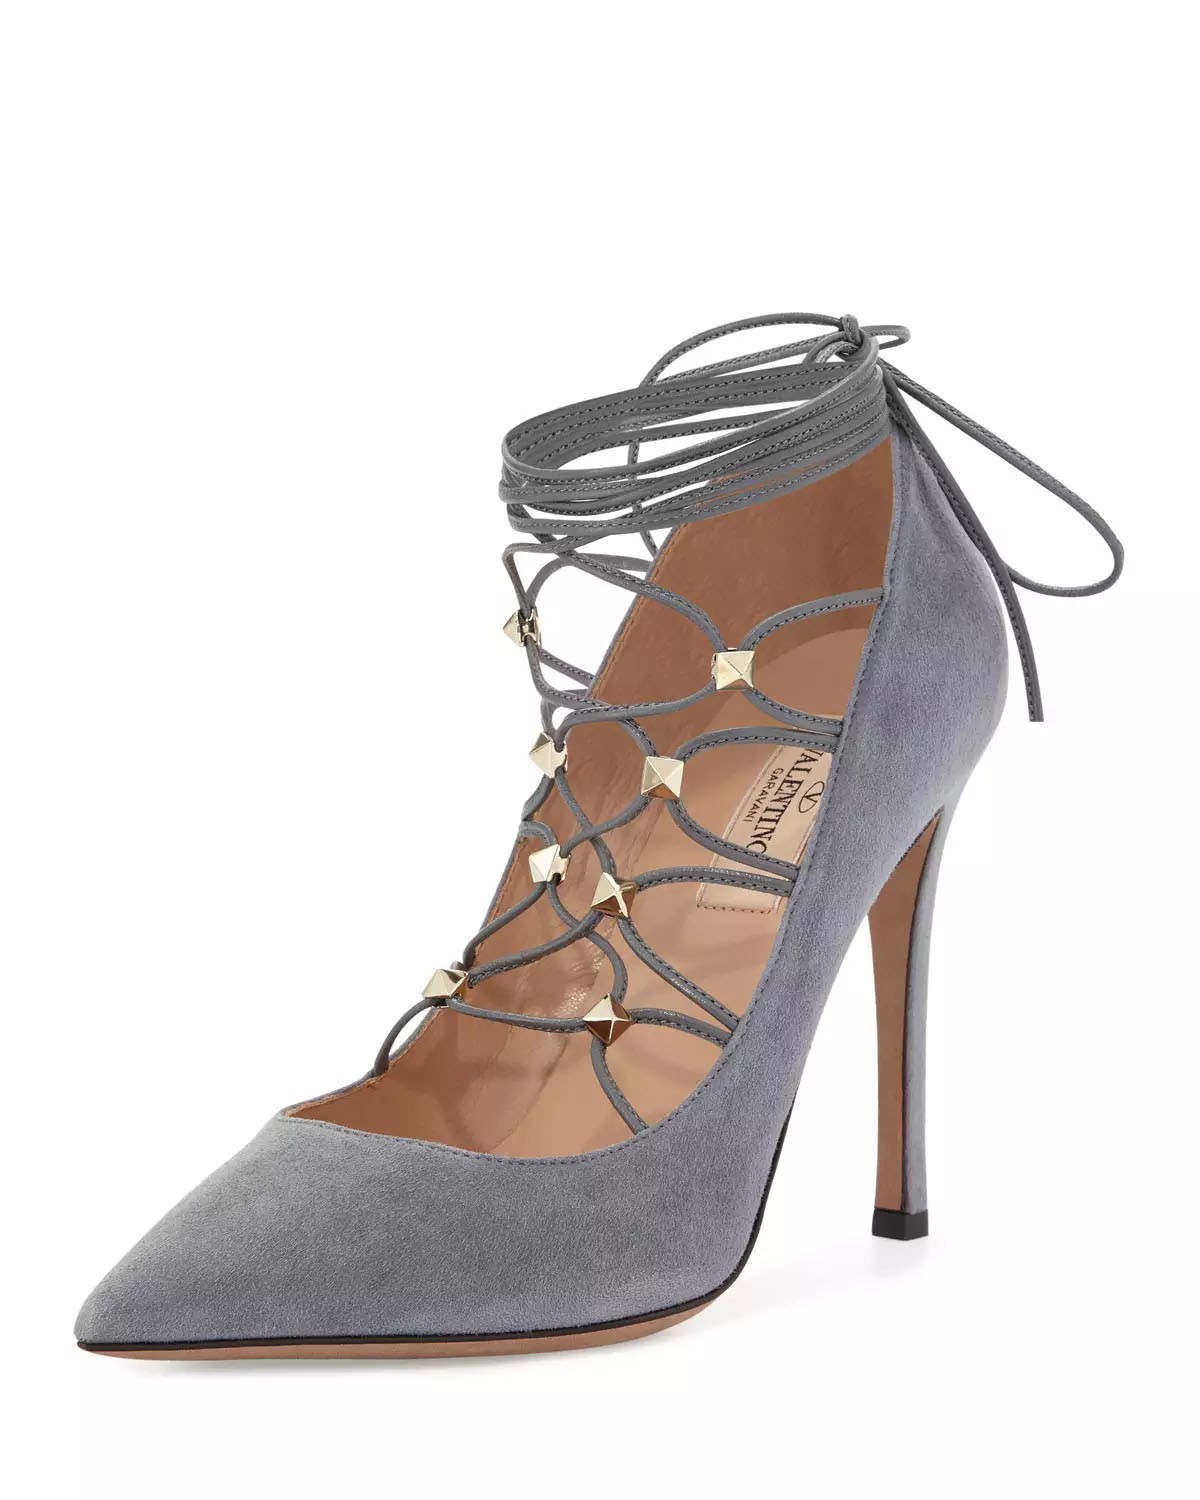 Valentino Rockstud Suede Lace-Up 105mm Pump, Light Stone – Shoes Post